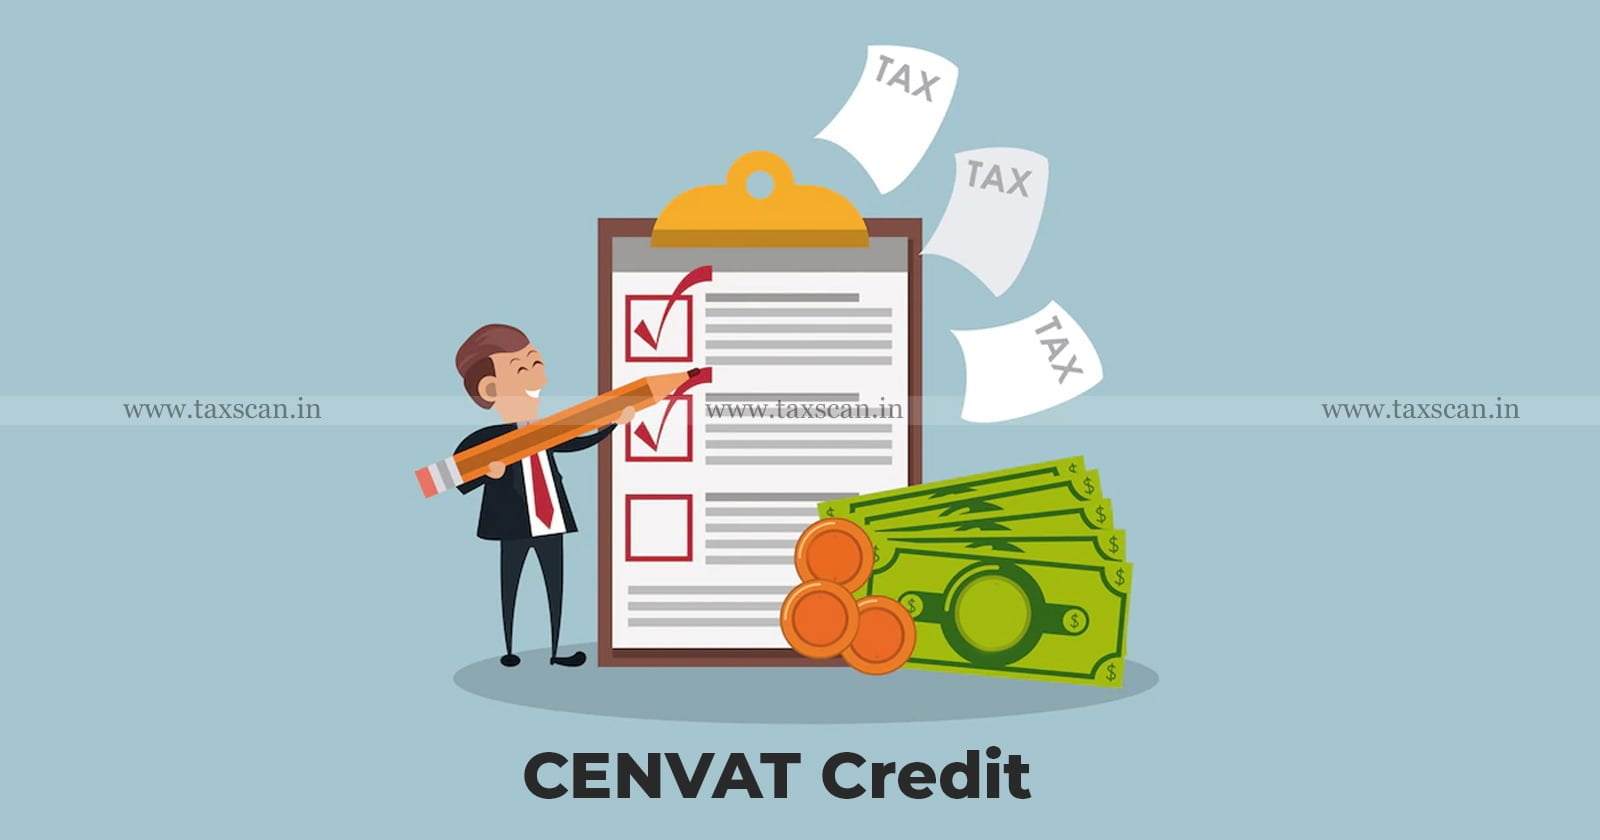 Payment - Service Tax - Payment of Service Tax - Right to Claim - Claim - Cenvat Credit - CESTAT - taxscan